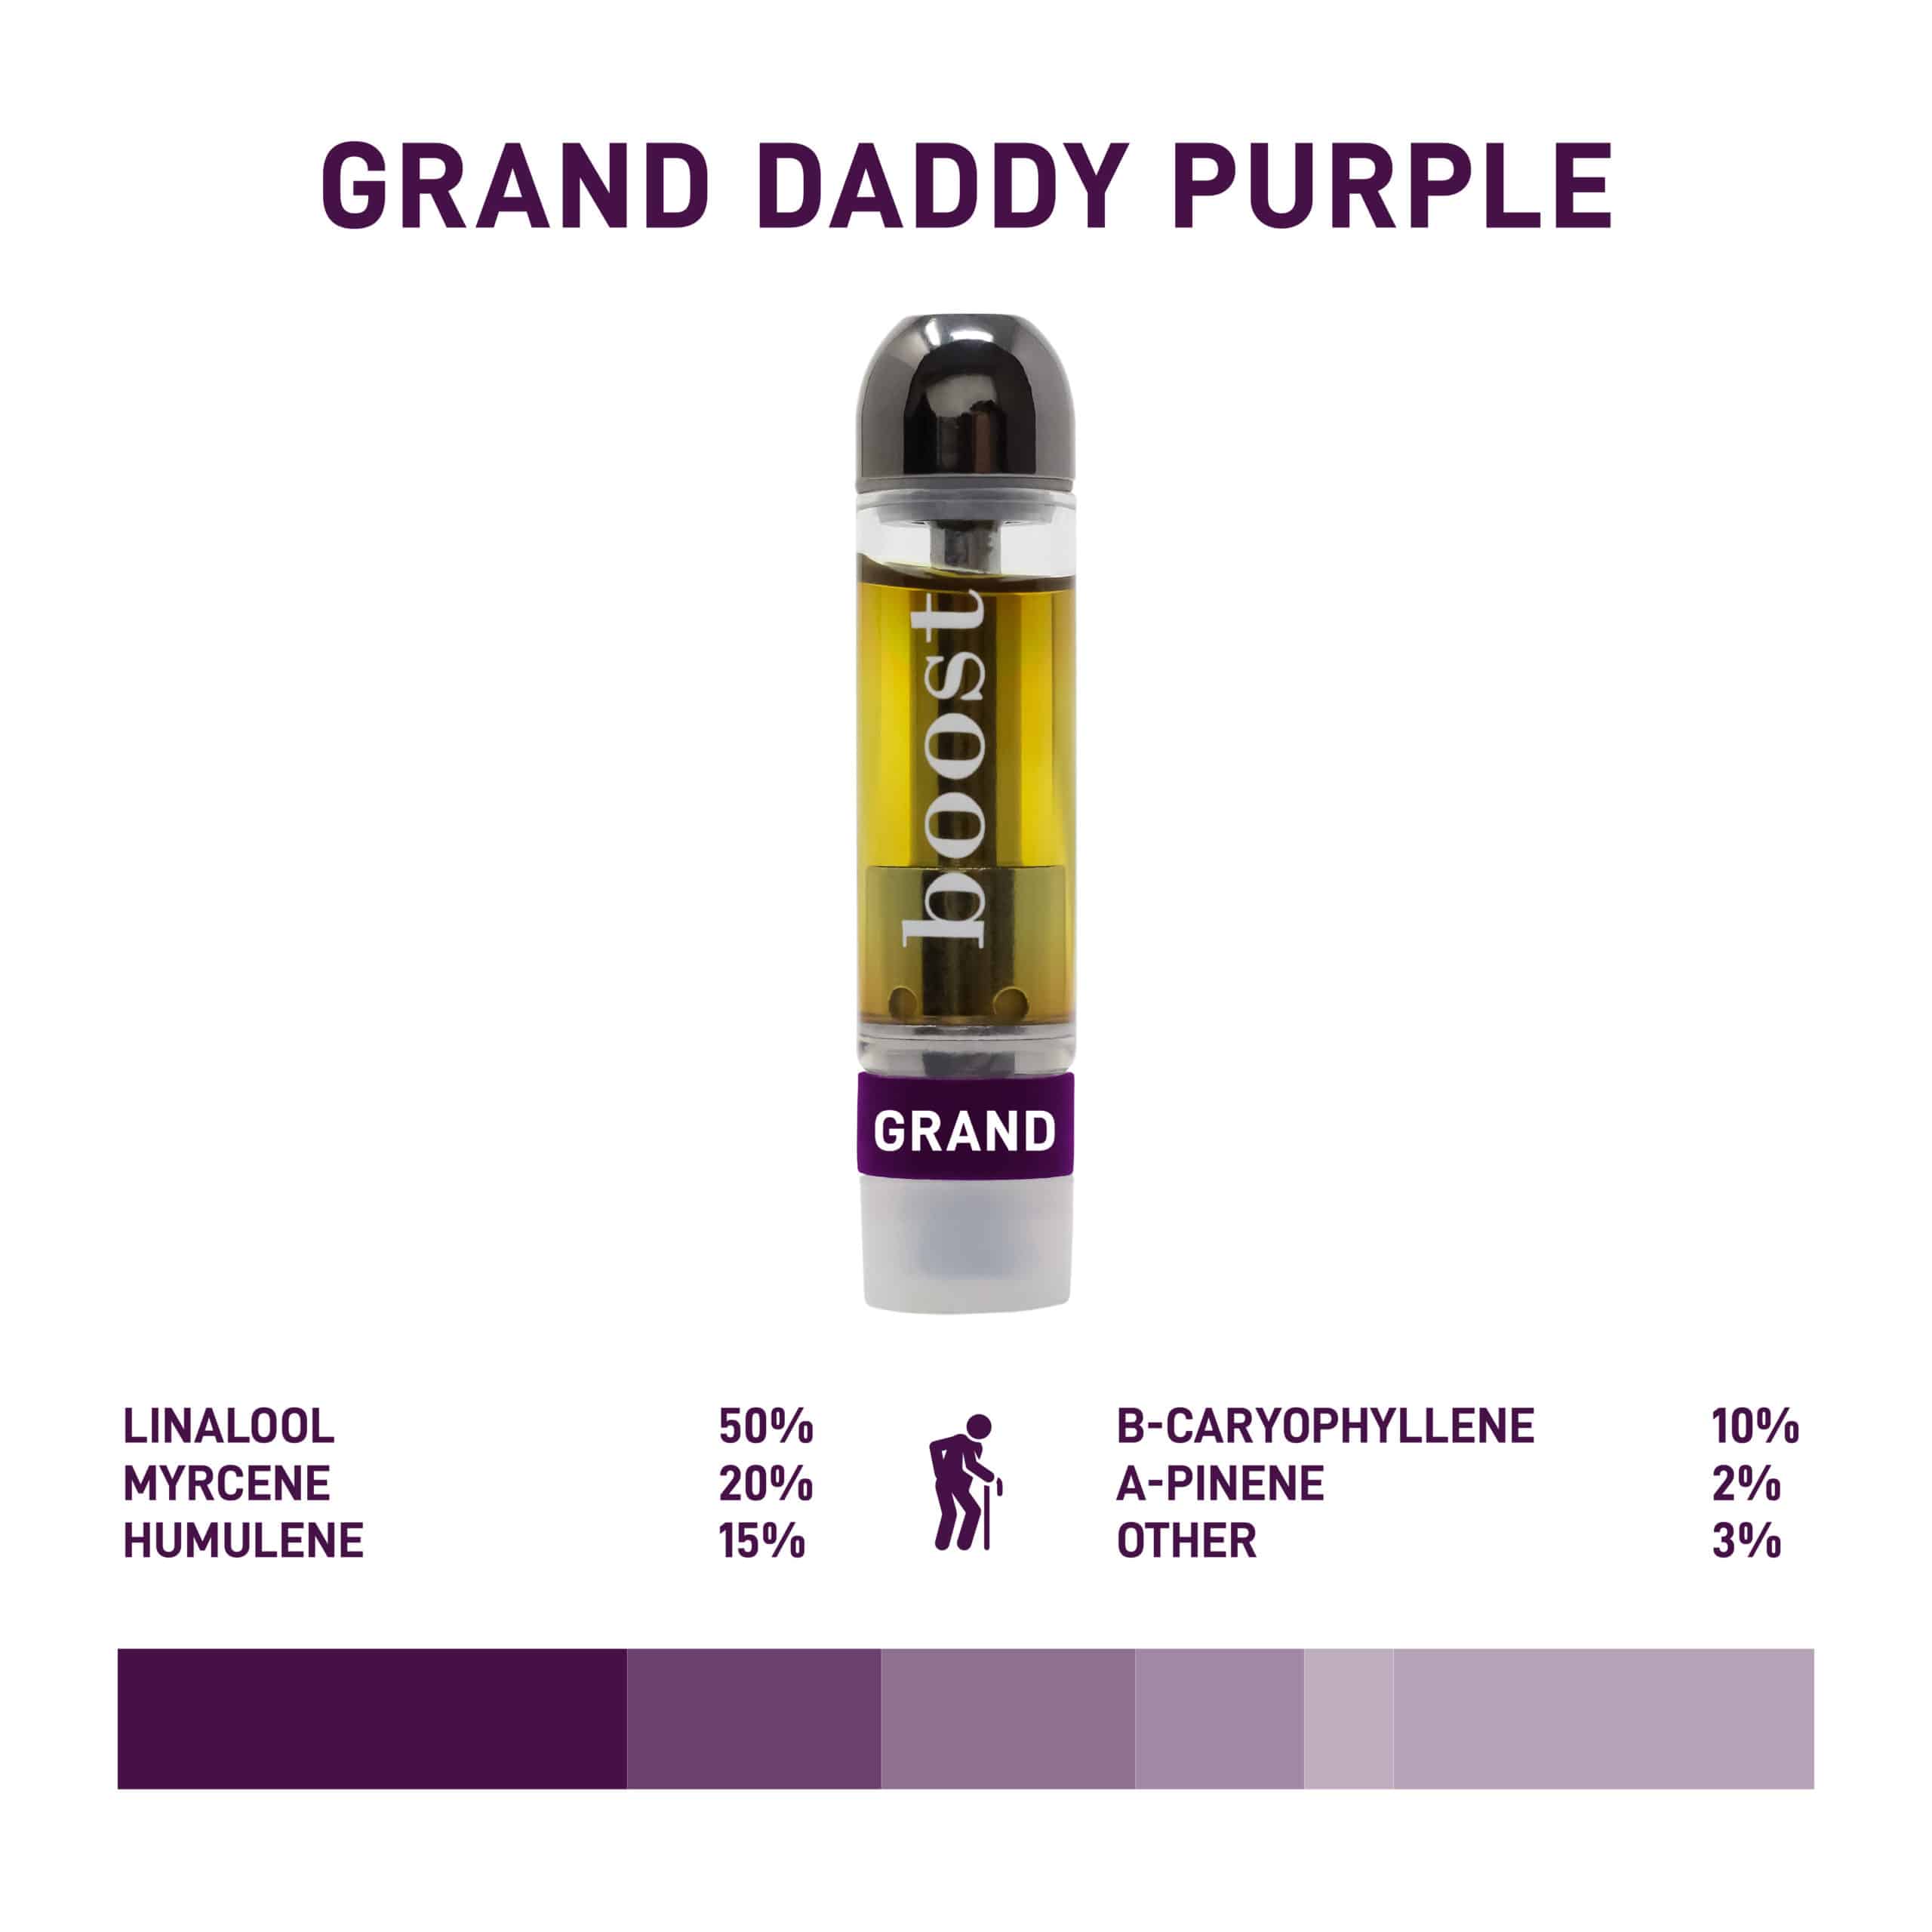 Boost THC Vape Cartridge Grand Daddy Purple with 90 minutes Calgary weed delivery